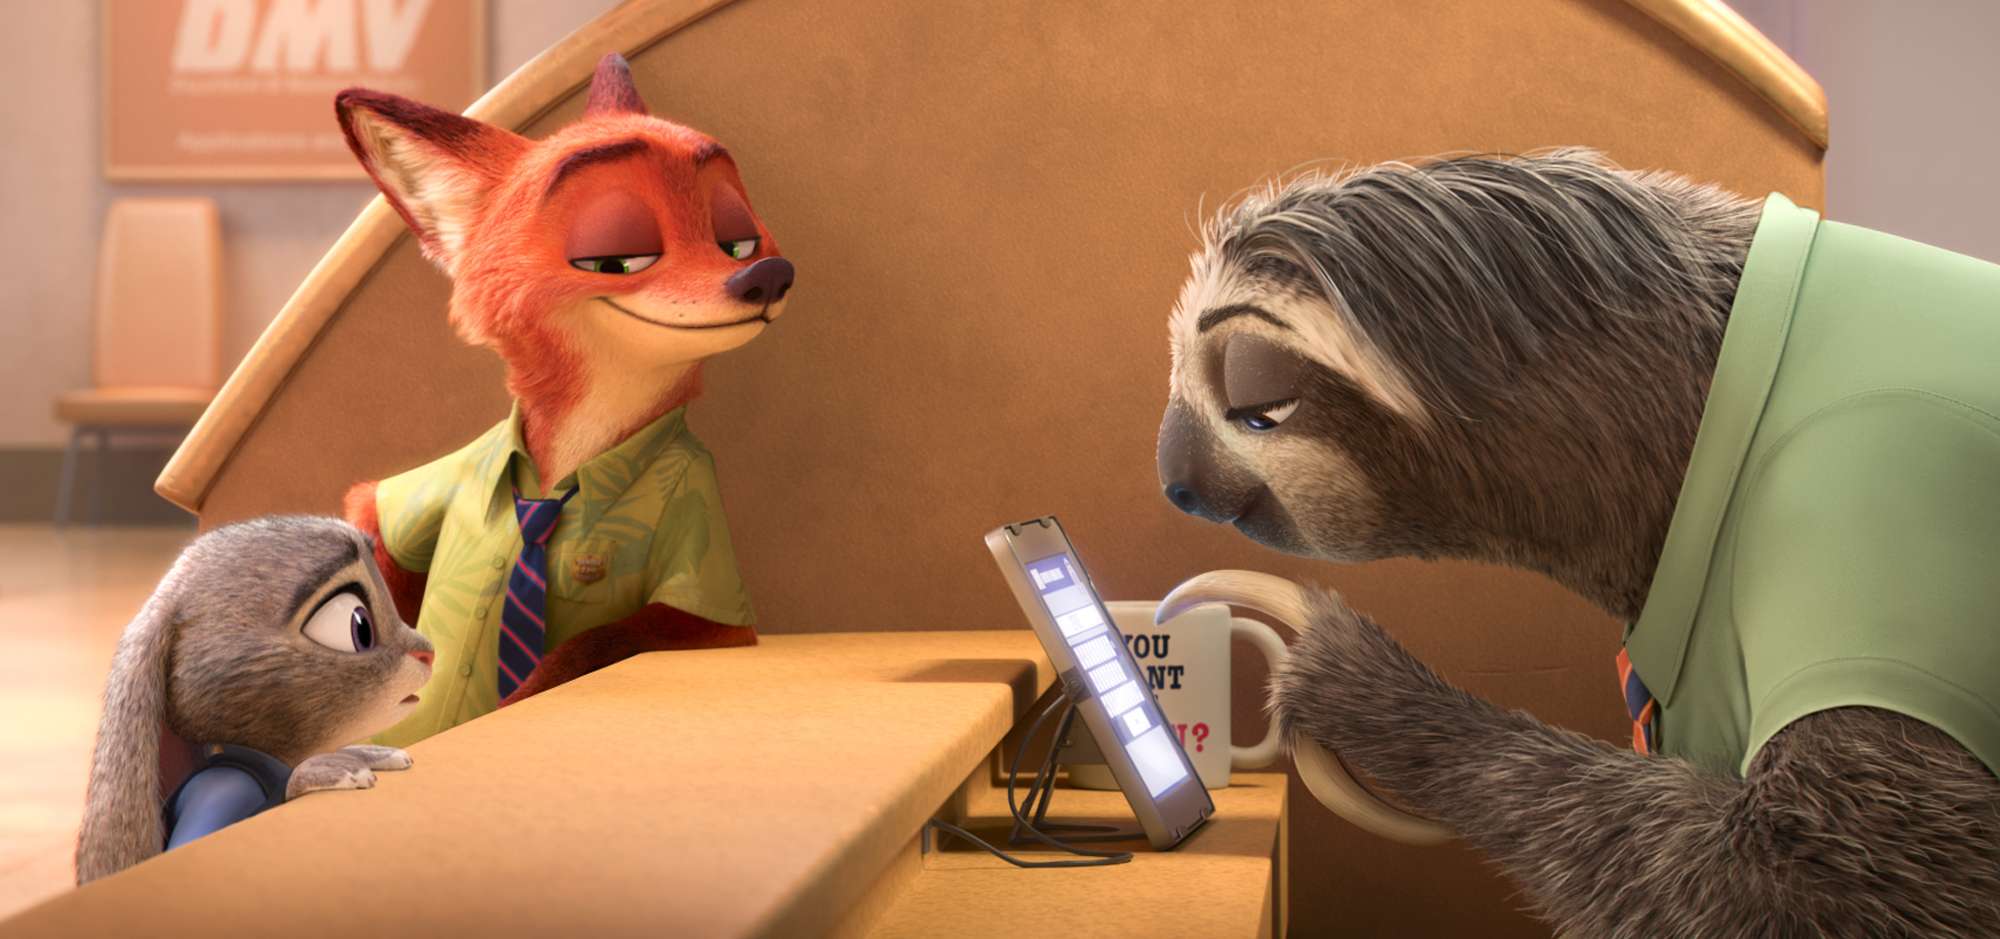 A still from the movie “Zootopia”, which broke a one-day record for box-office takings for an animated film in China. Photo: AP